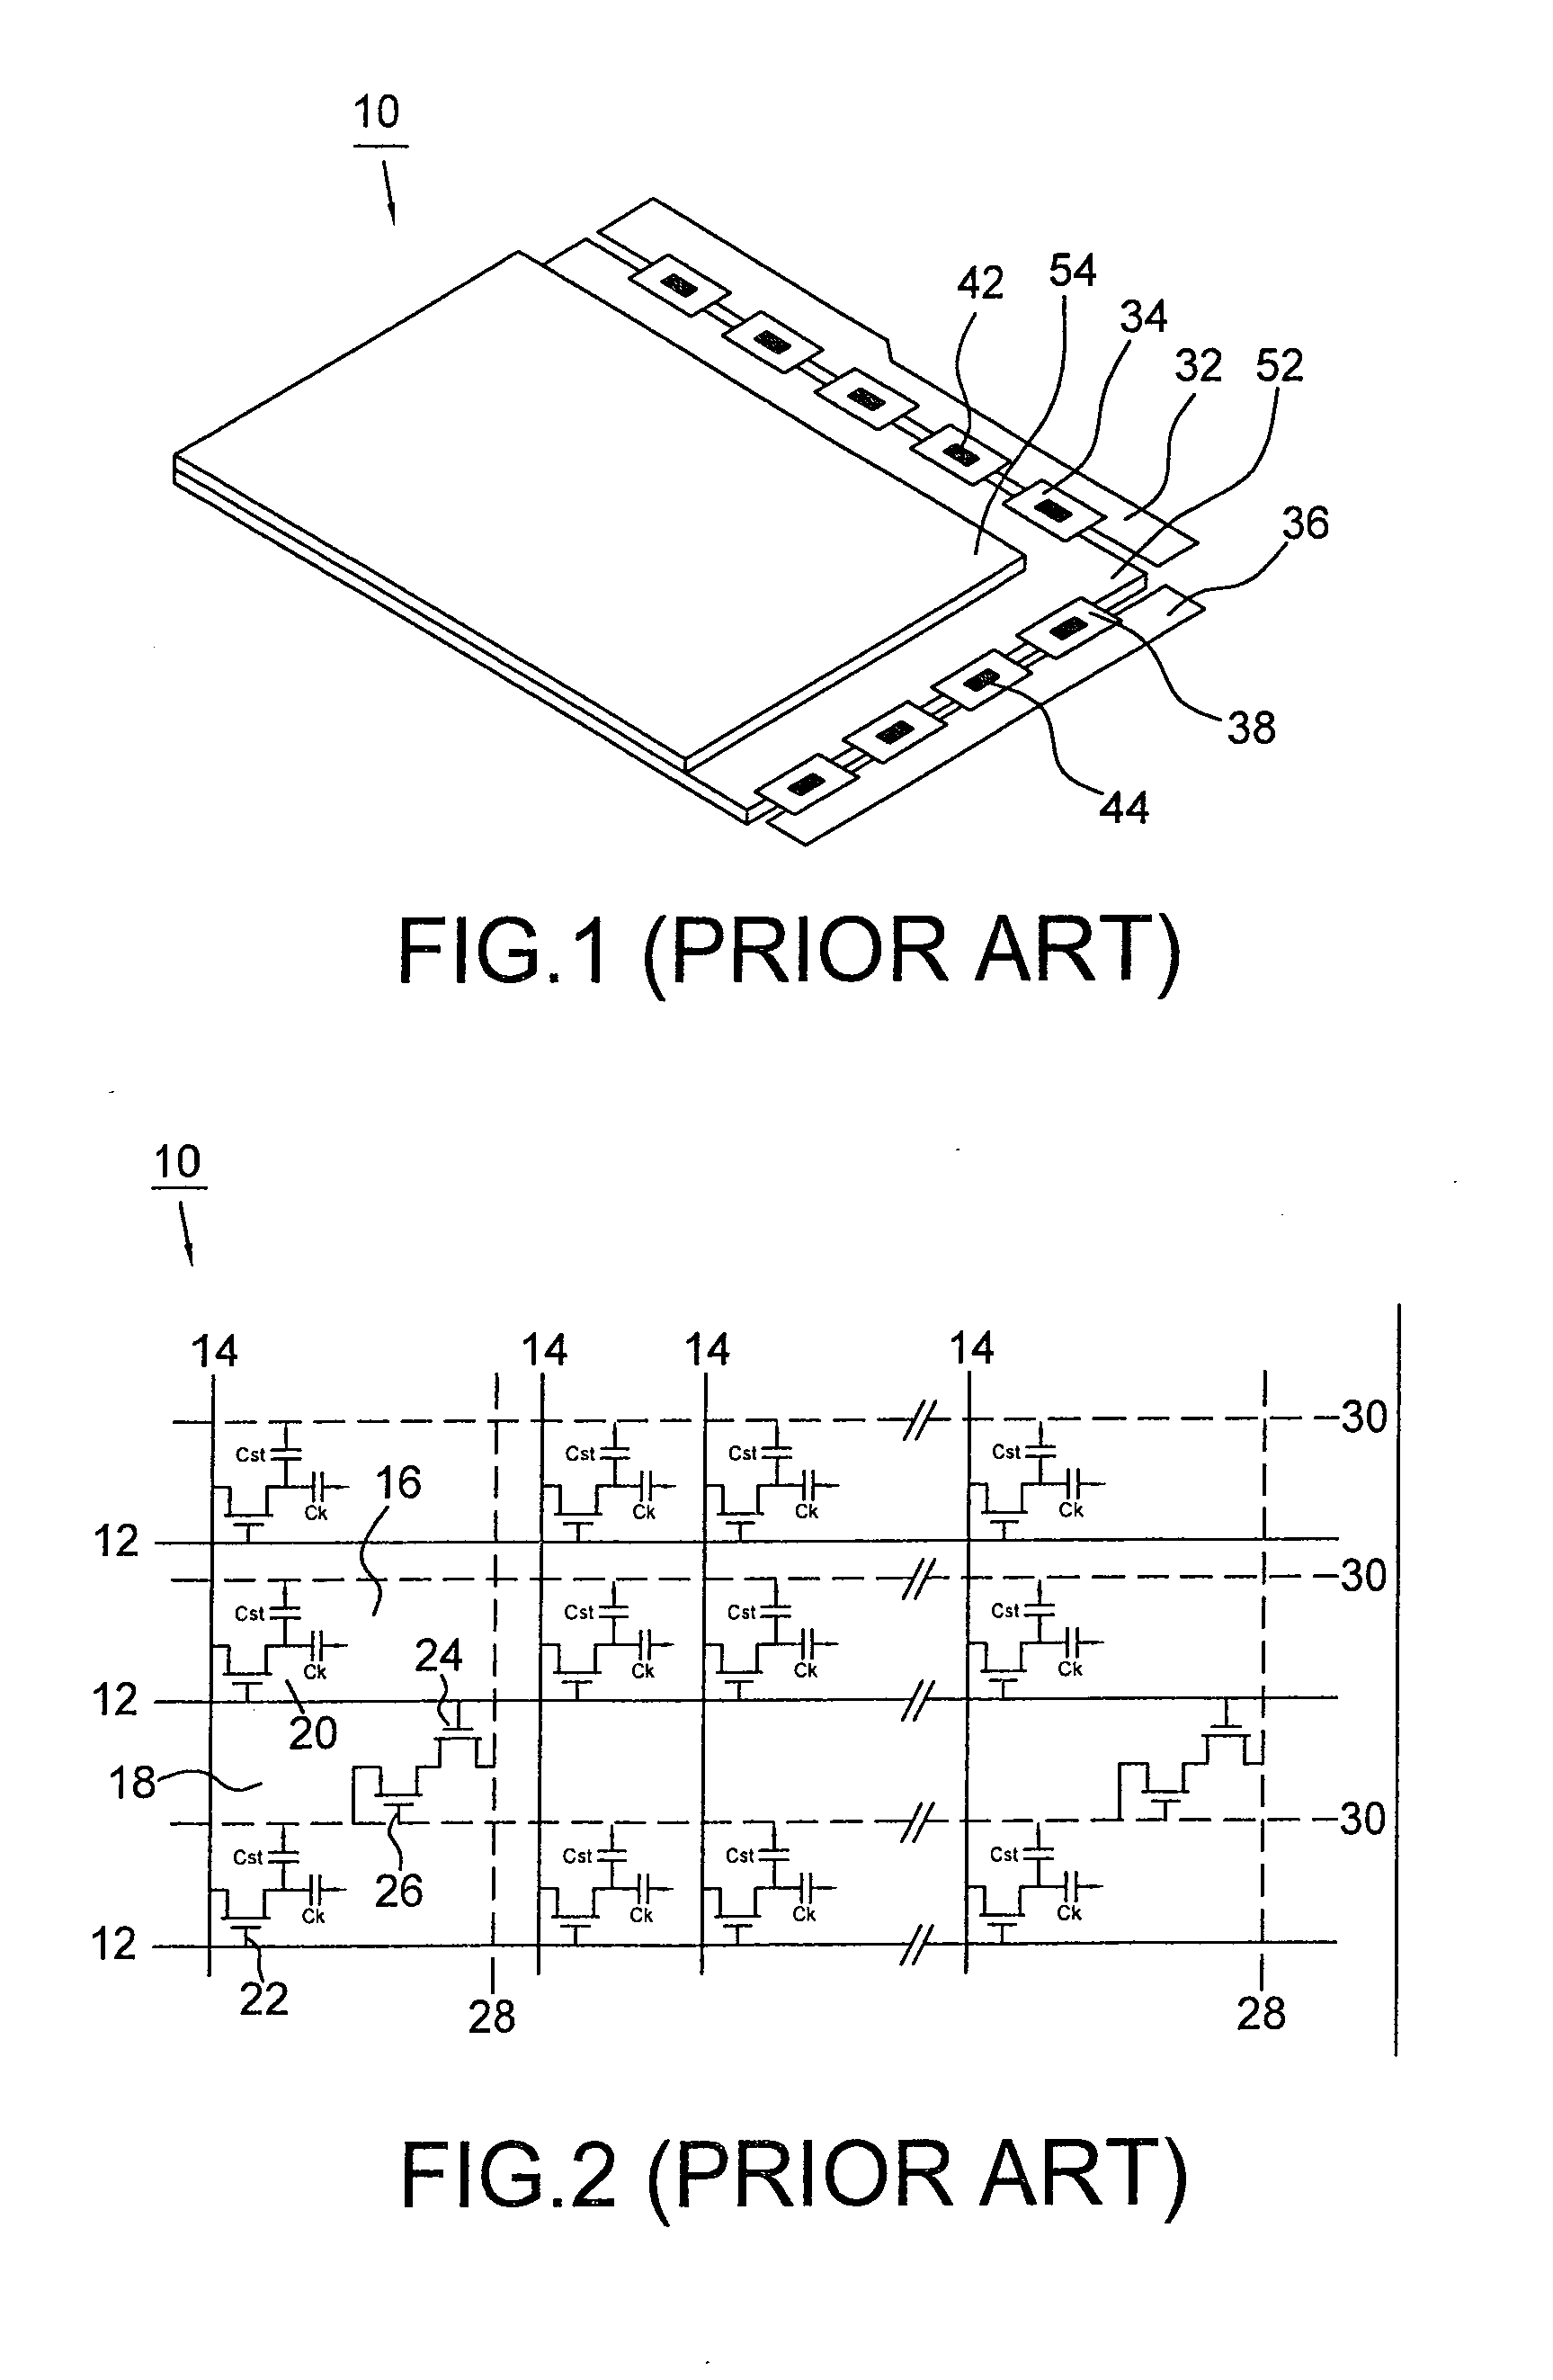 Liquid crystal display panel having a touch function